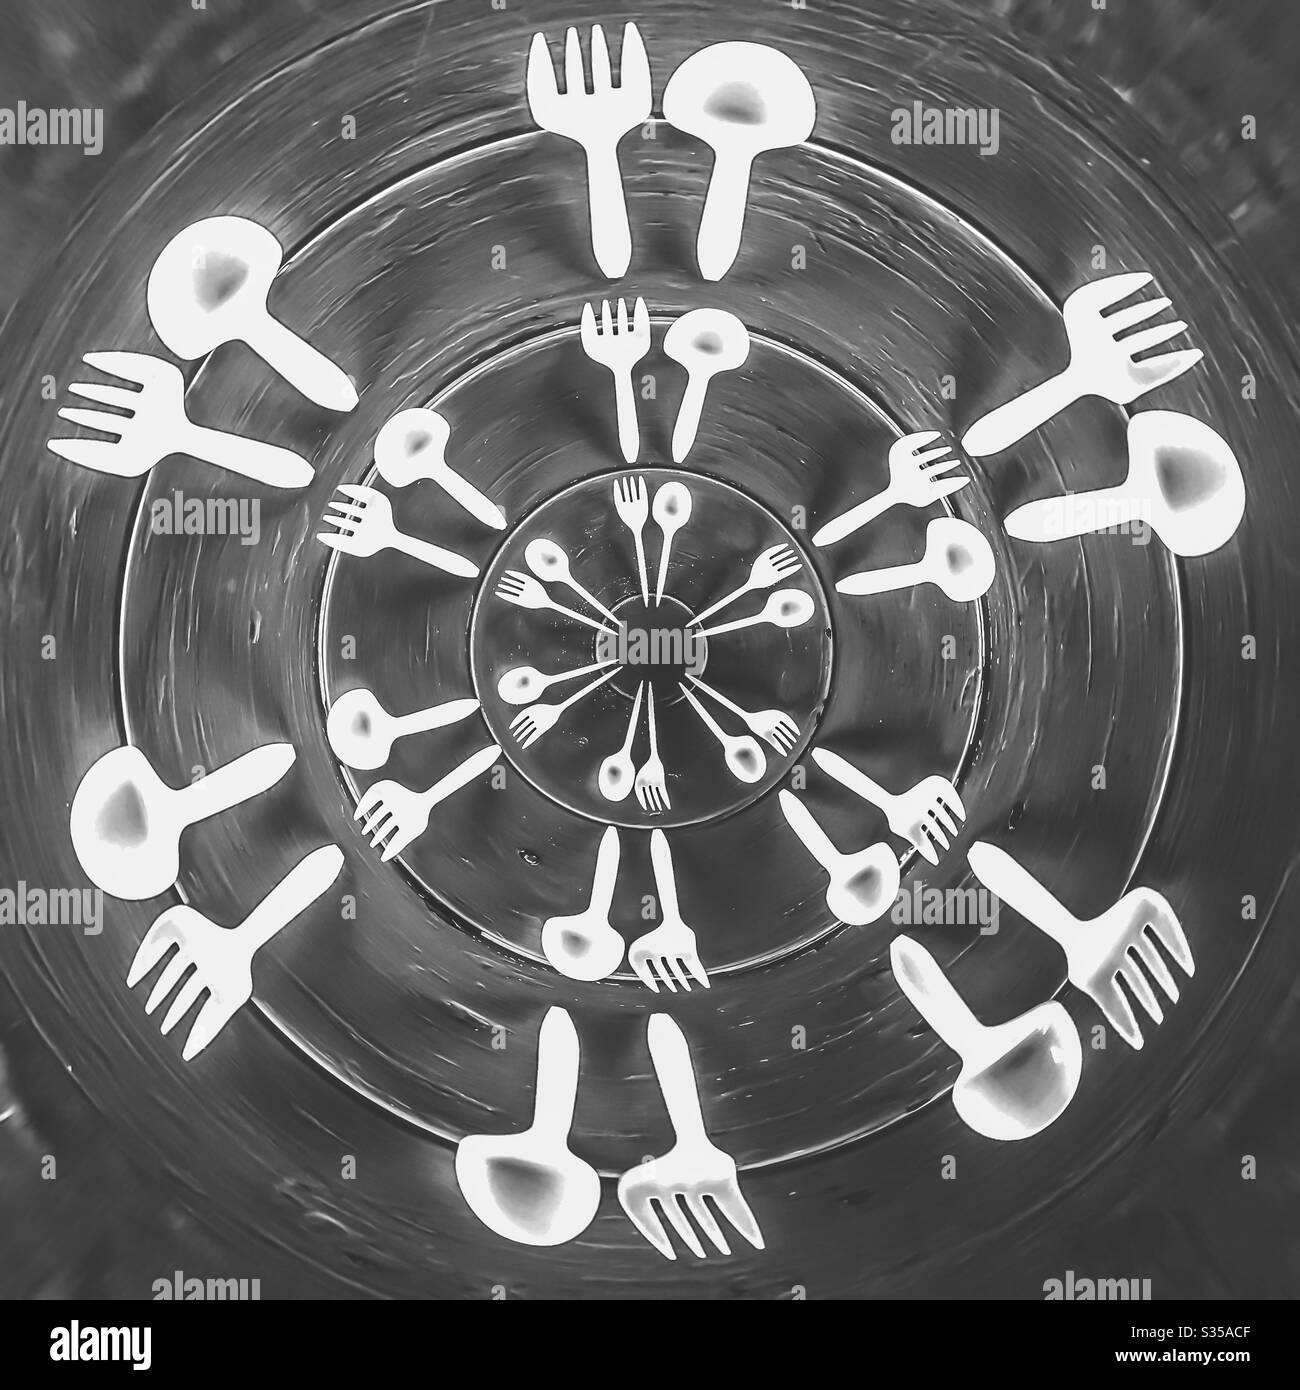 Fork and spoon pattern in black and white Stock Photo